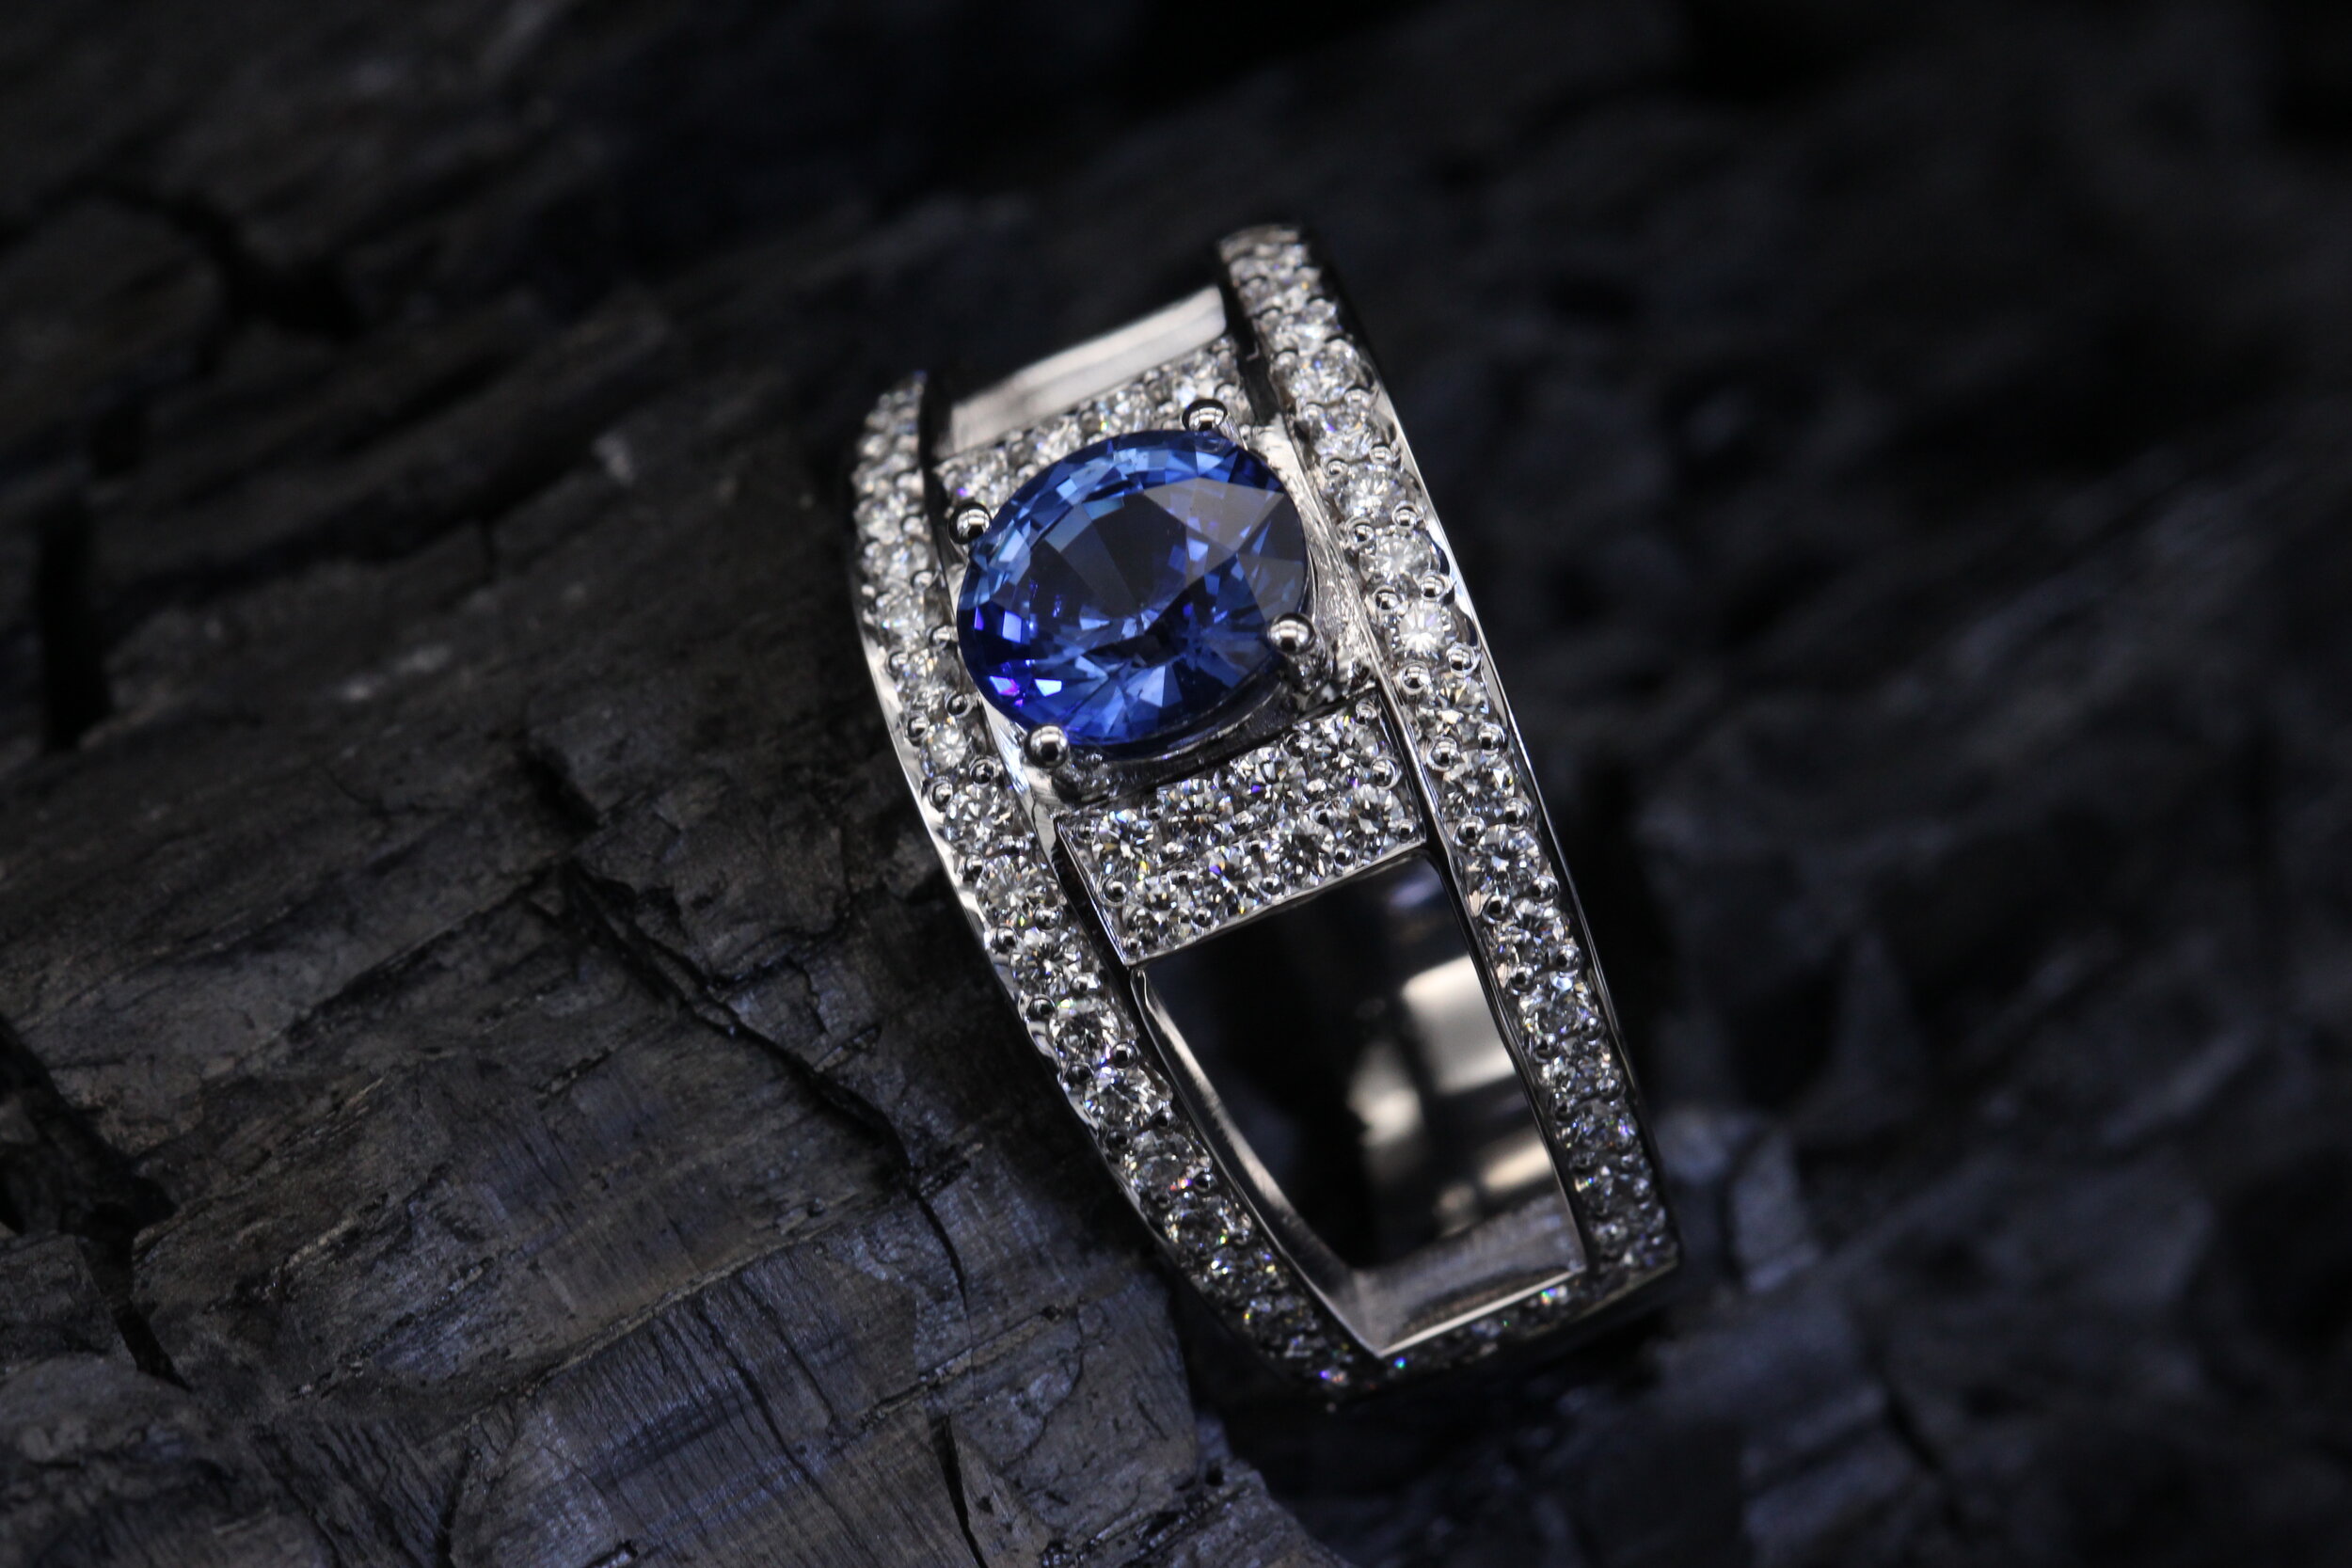 Gold ring paved with diamonds and set with a  vibrant blue Ceylon sapphire.